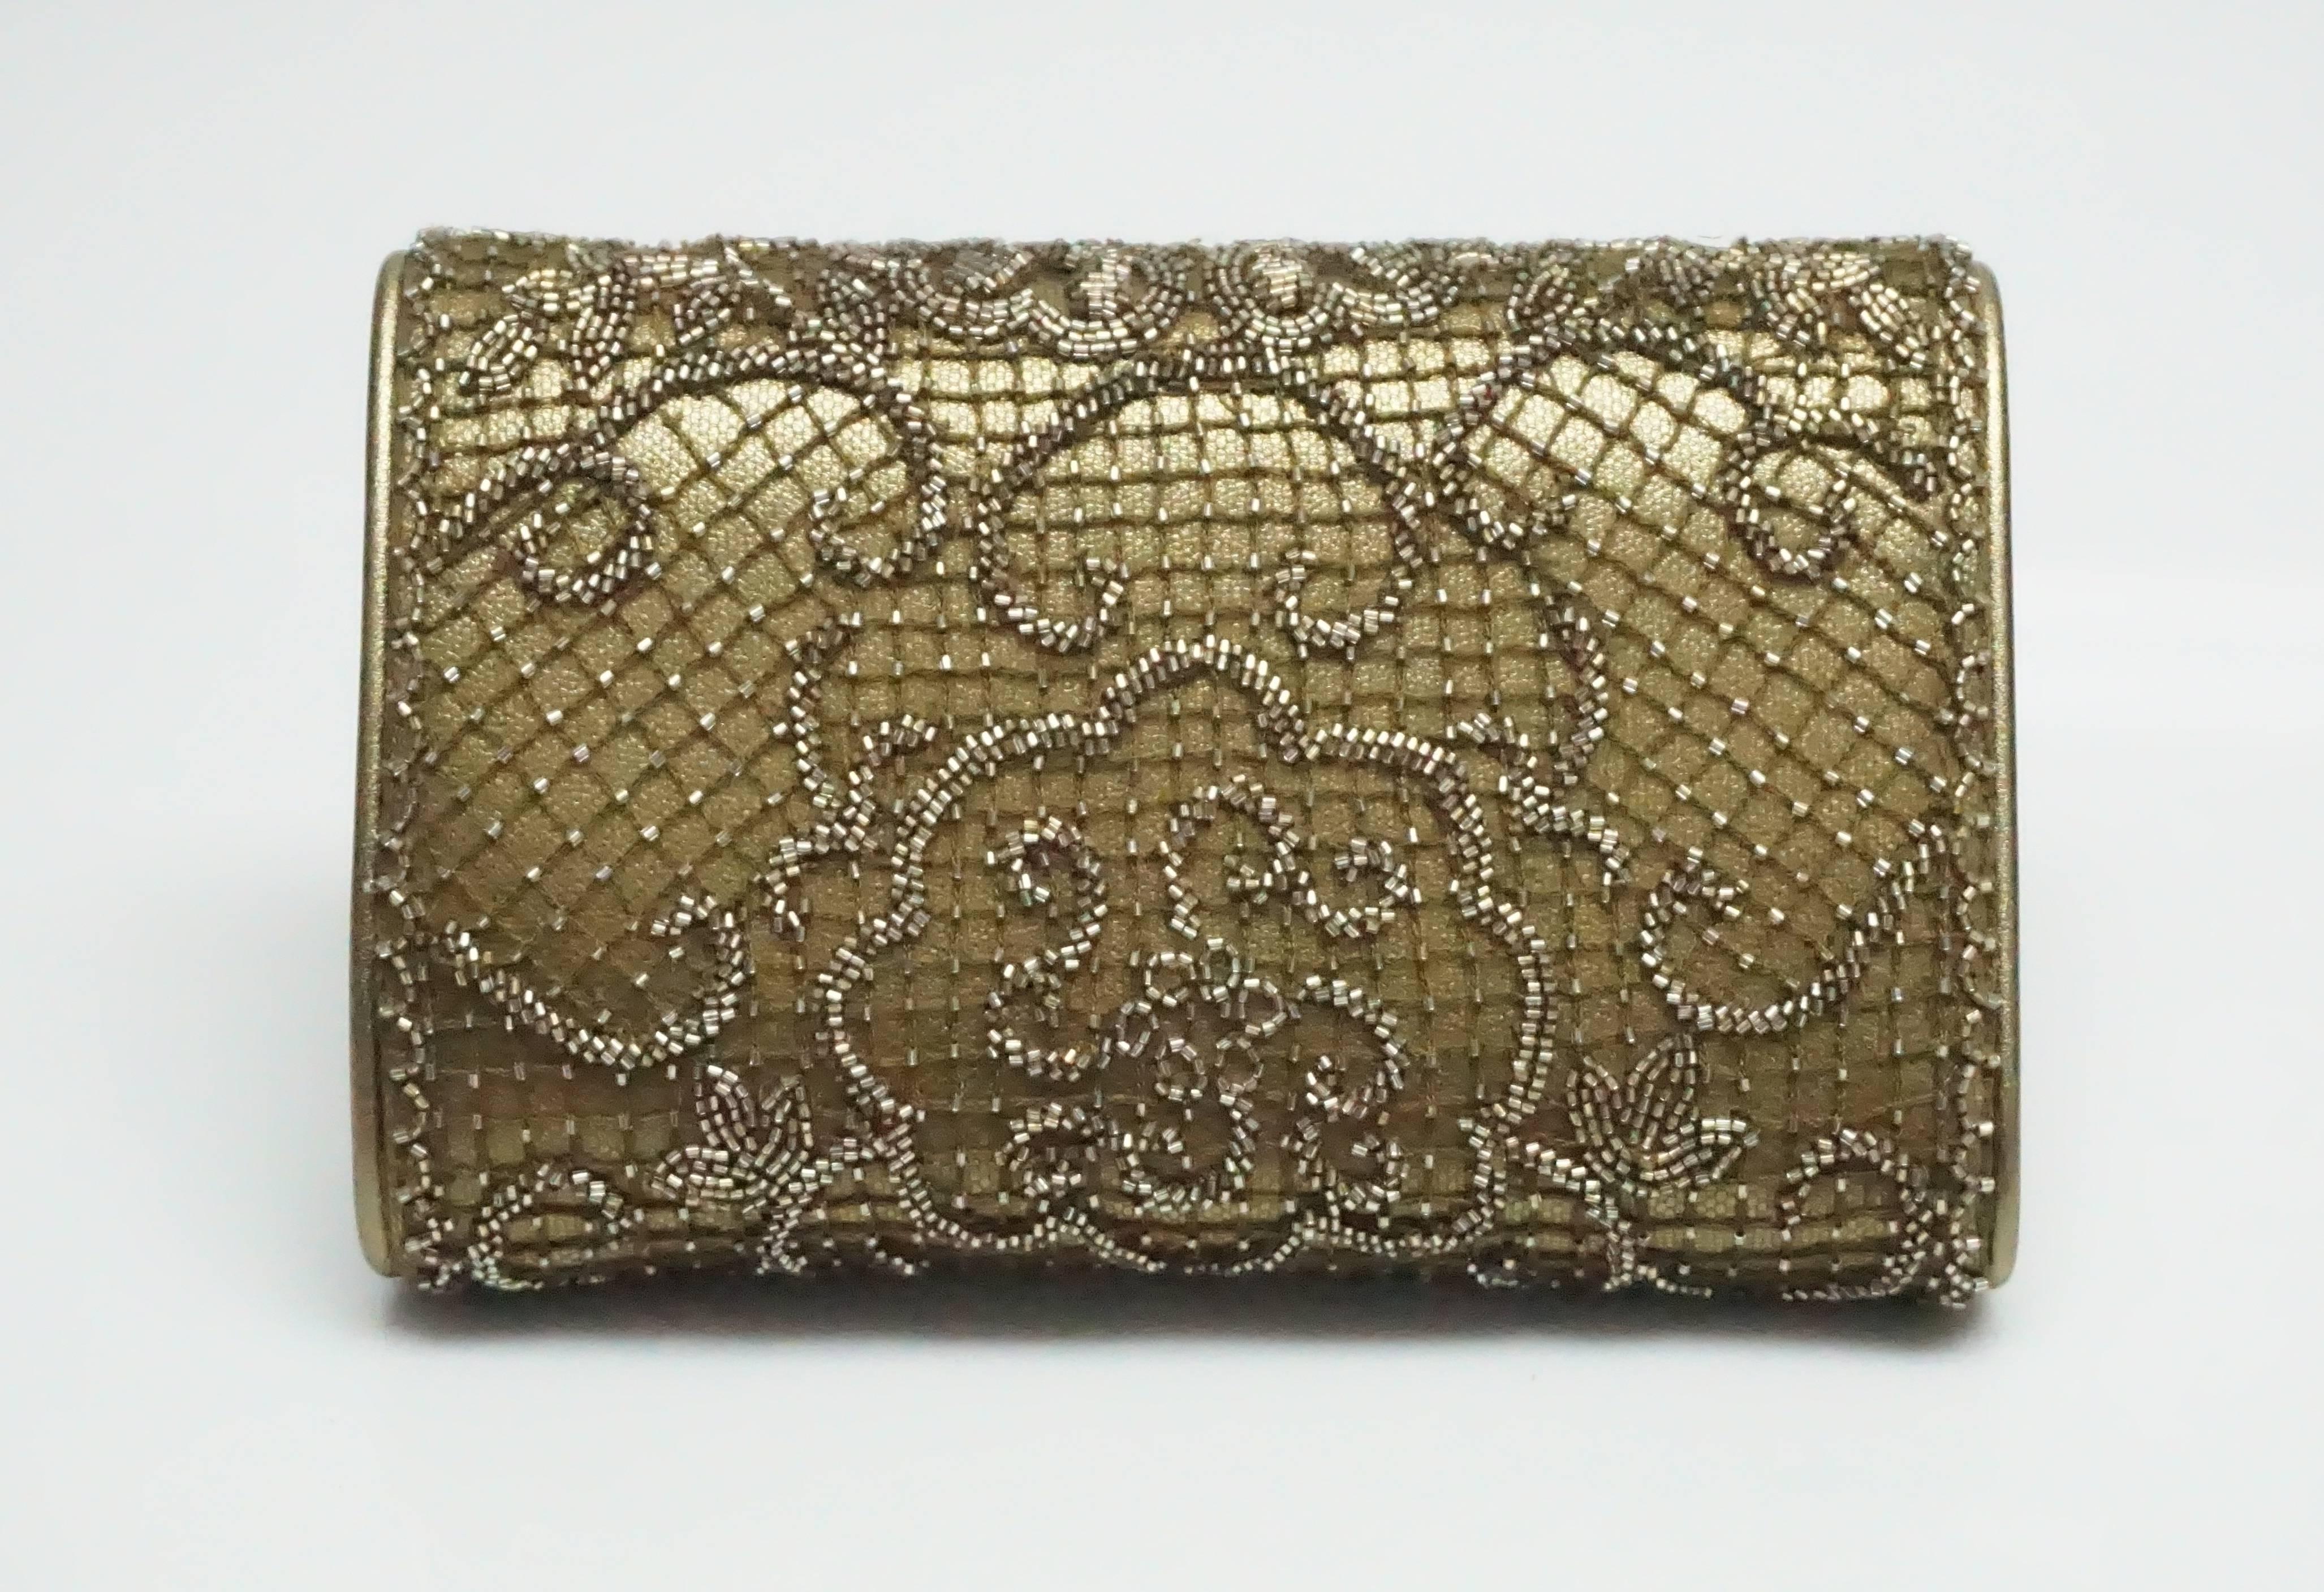 Ralph Lauren Collection Gold/Bronze Leather Beaded Clutch.  This beautiful clutch is new with tags. The clutch is a  gold/bronze metallic color leather with a beaded netting over it. The inside includes one small open pocket. The clutch comes with